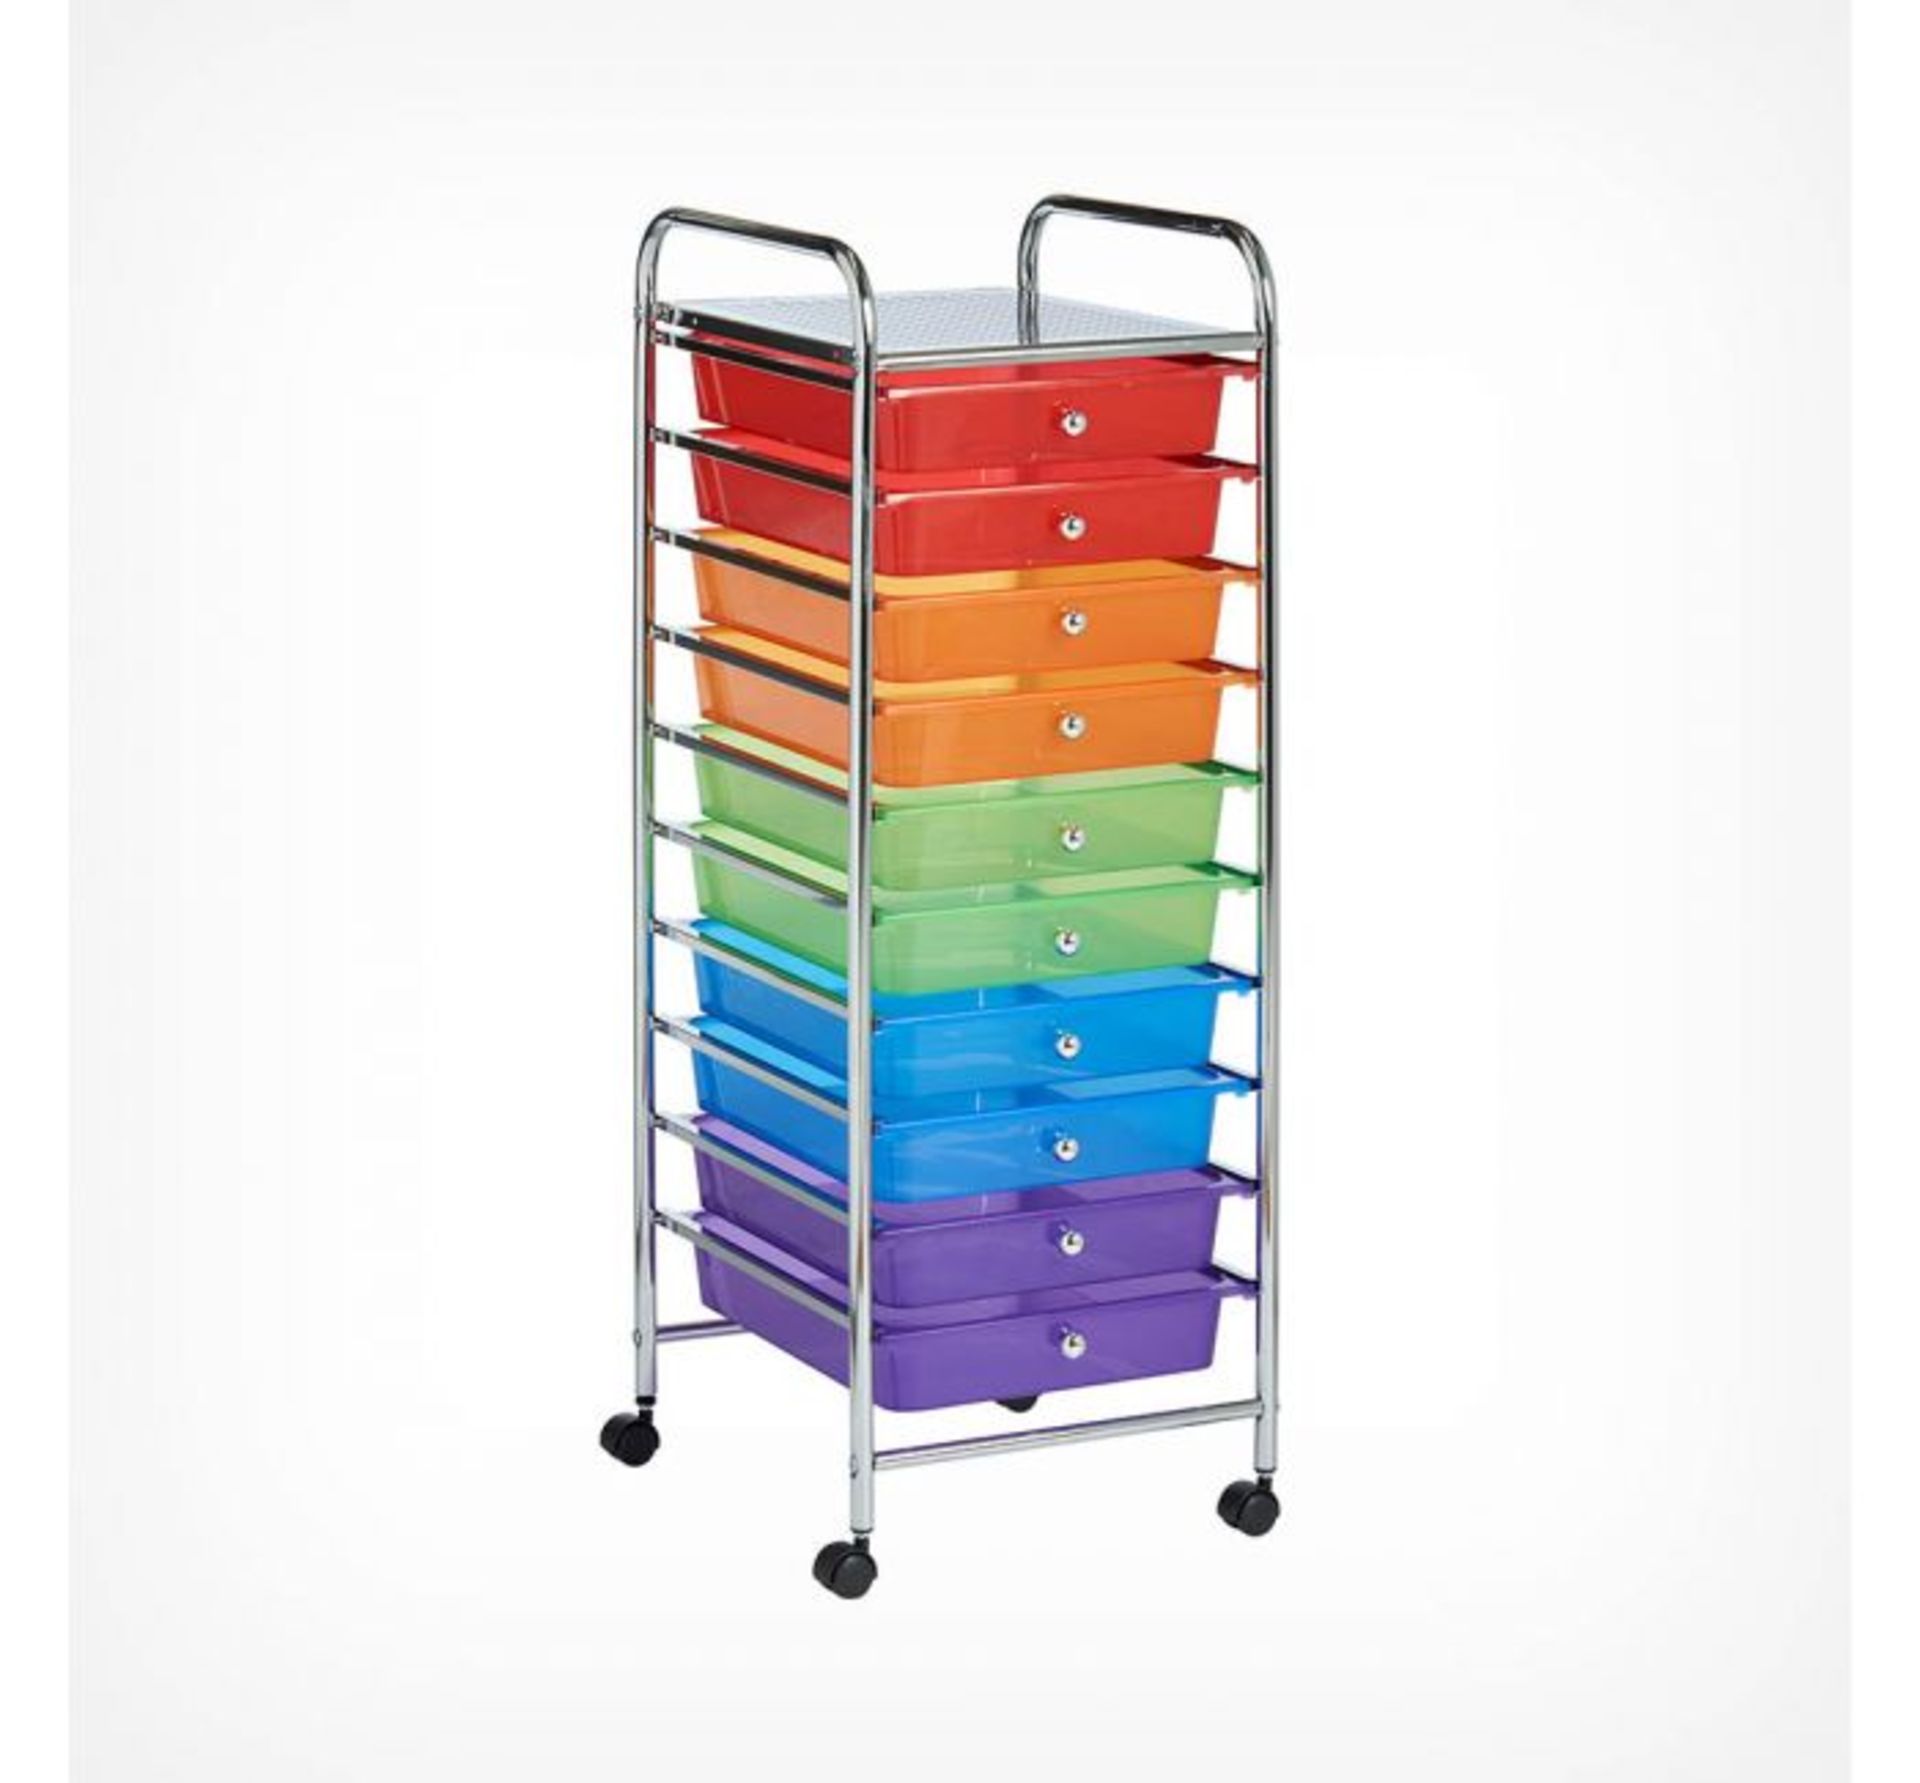 (TD145) 10 Drawer Trolley - Multi Colour Great for homes, offices, beauty salons and more! Ea... - Image 2 of 2